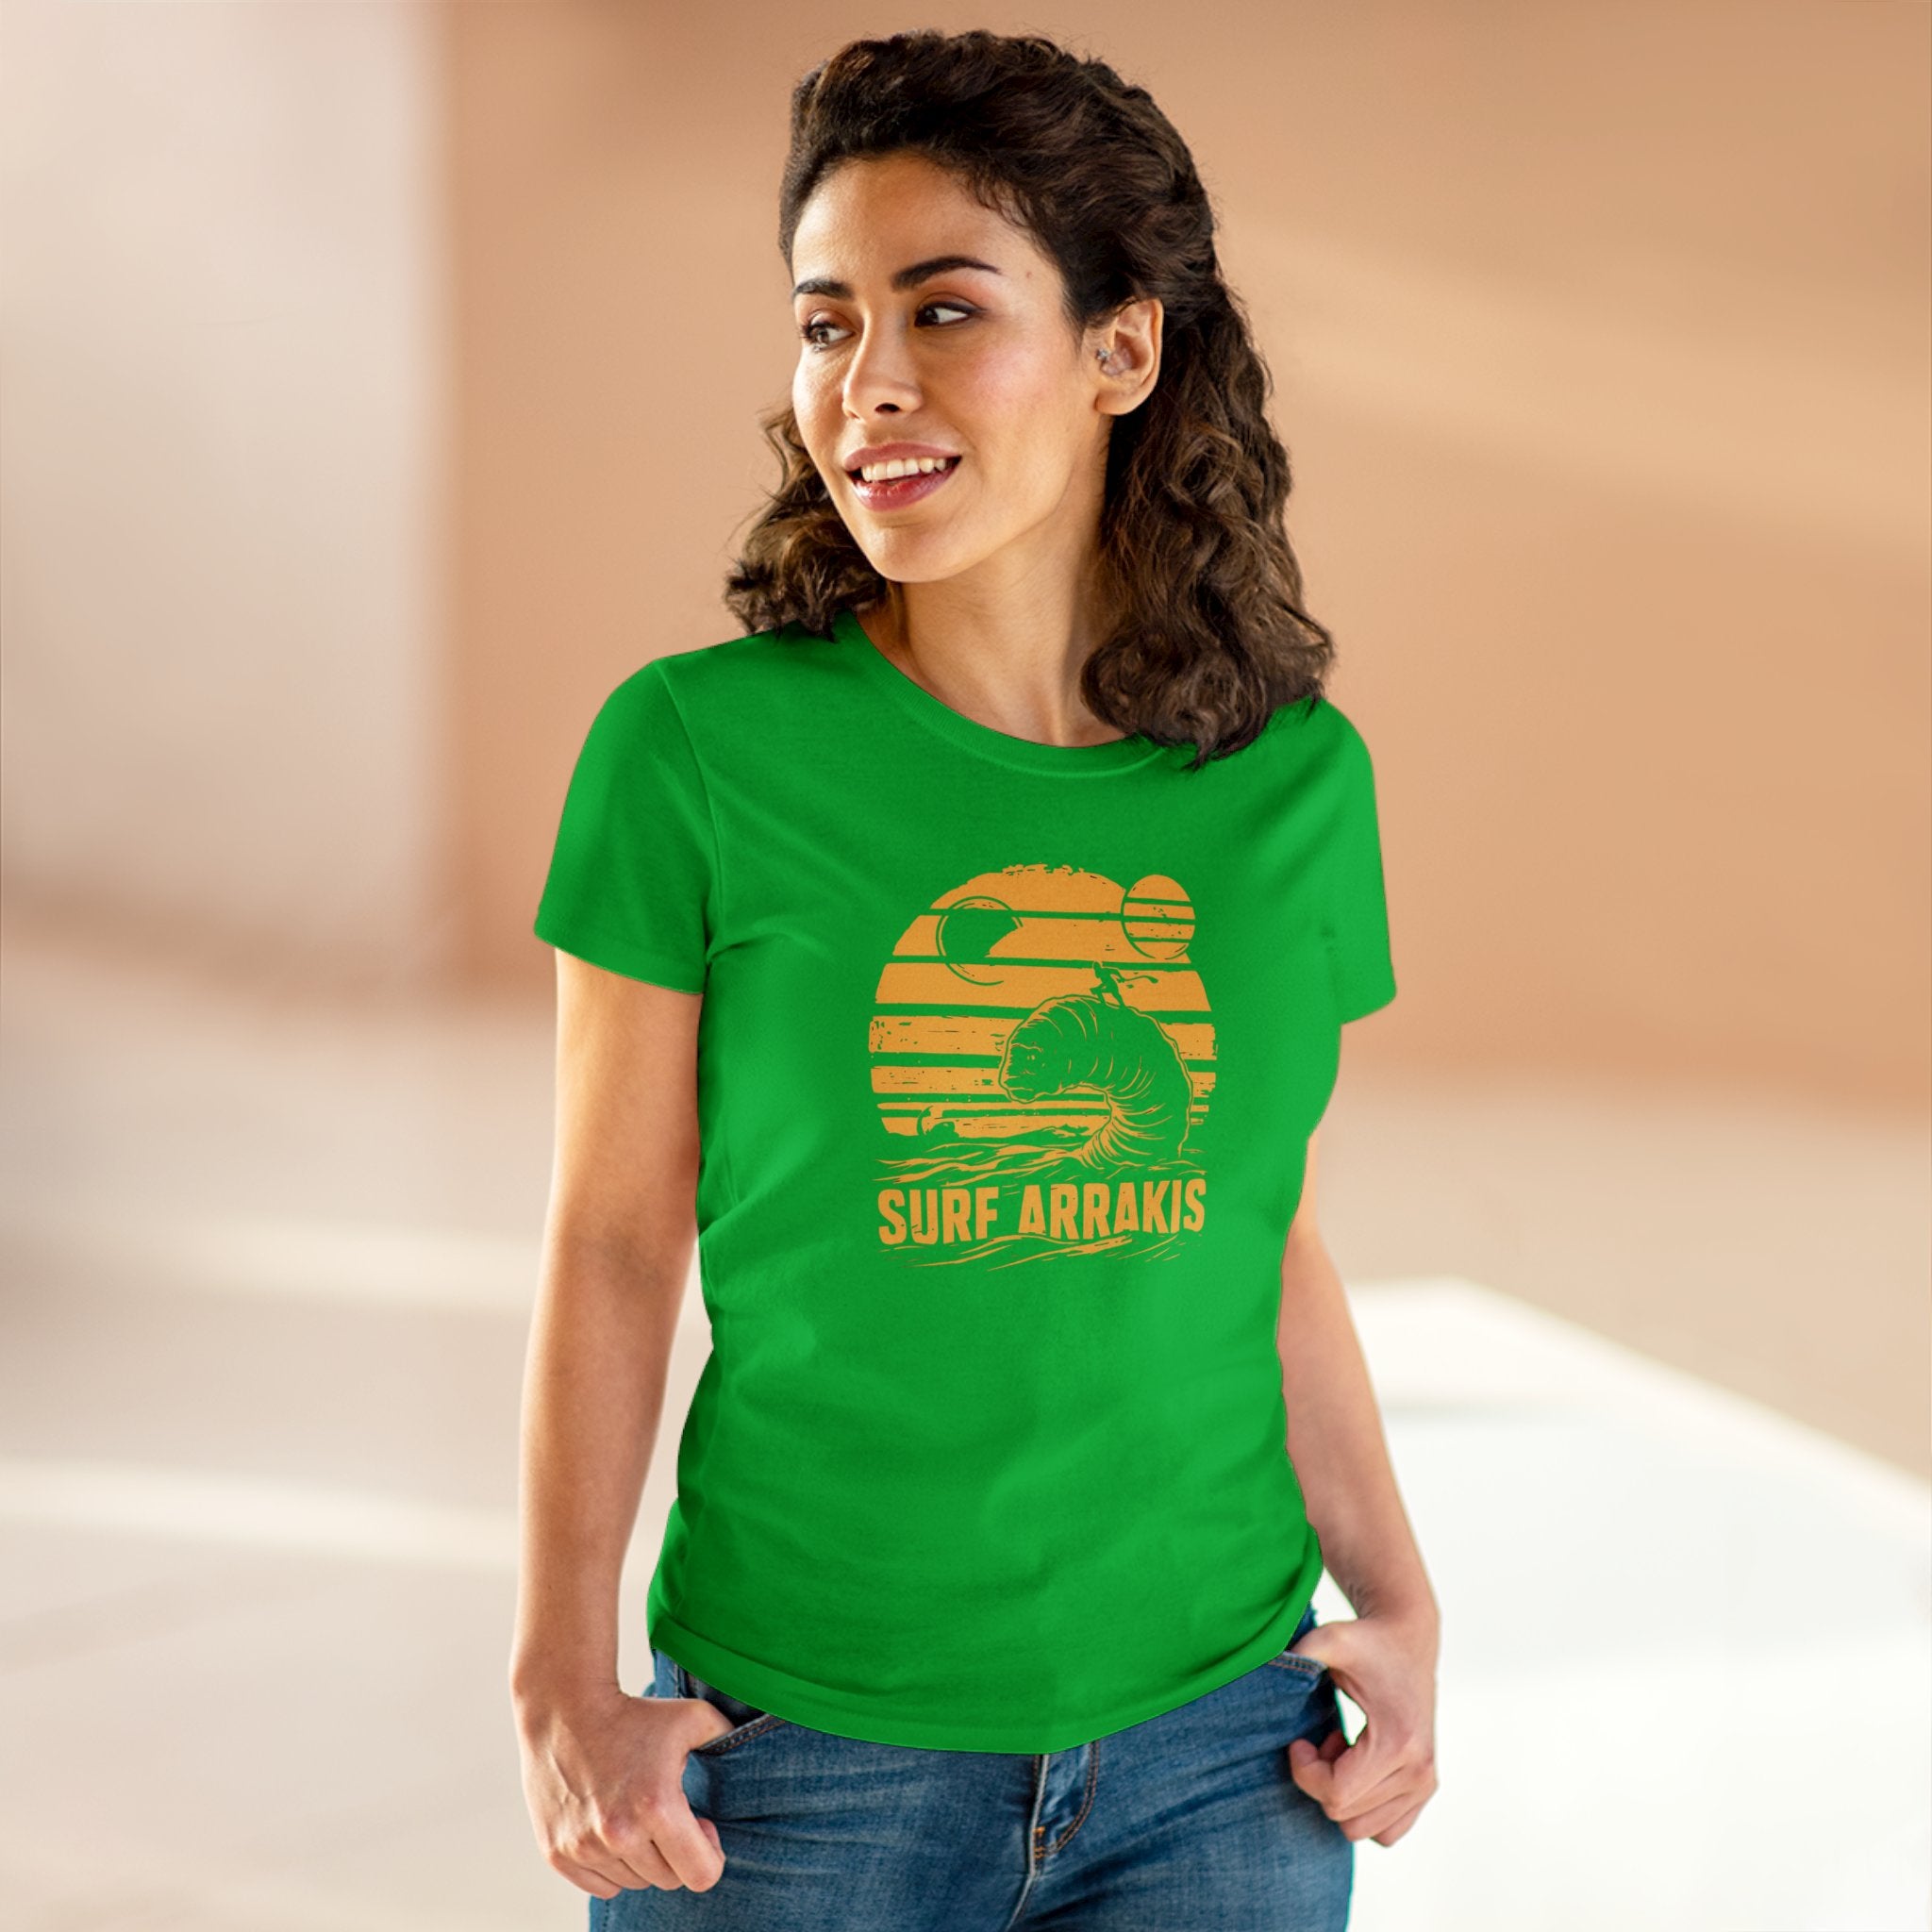 A woman wearing a green Surf Arrakis - Women's Tee, crafted from soft light cotton with a comfy design, stands indoors and smiles while looking to the side.